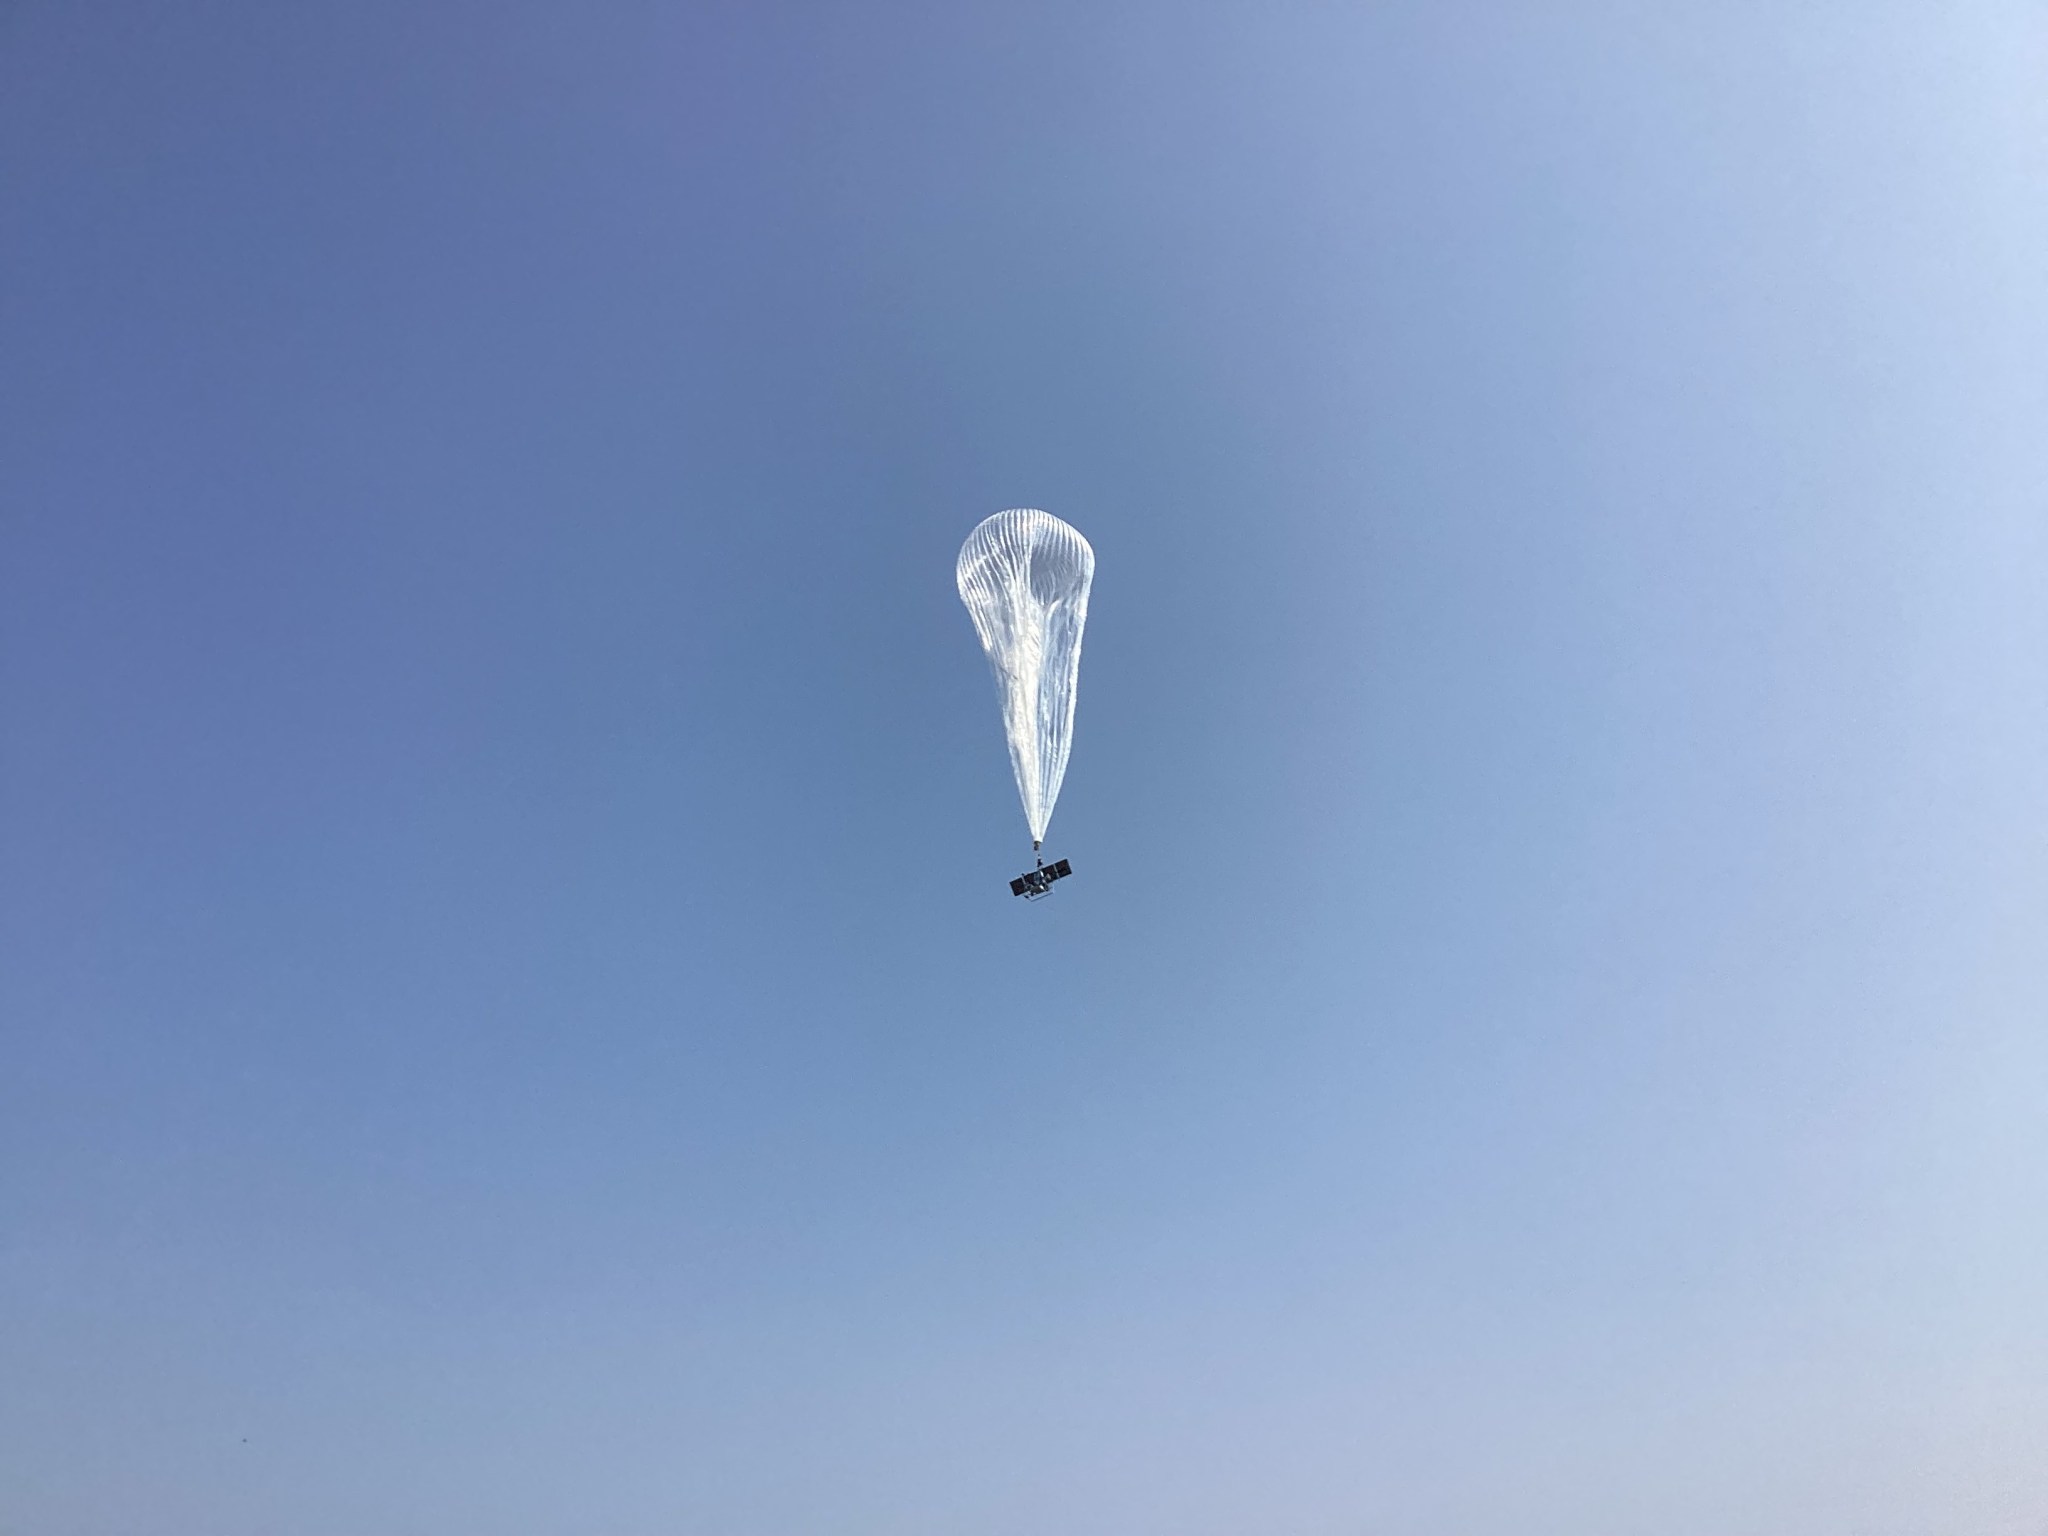 A silvery, translucent balloon with the payload gondola visible beneath it rises into the sky.